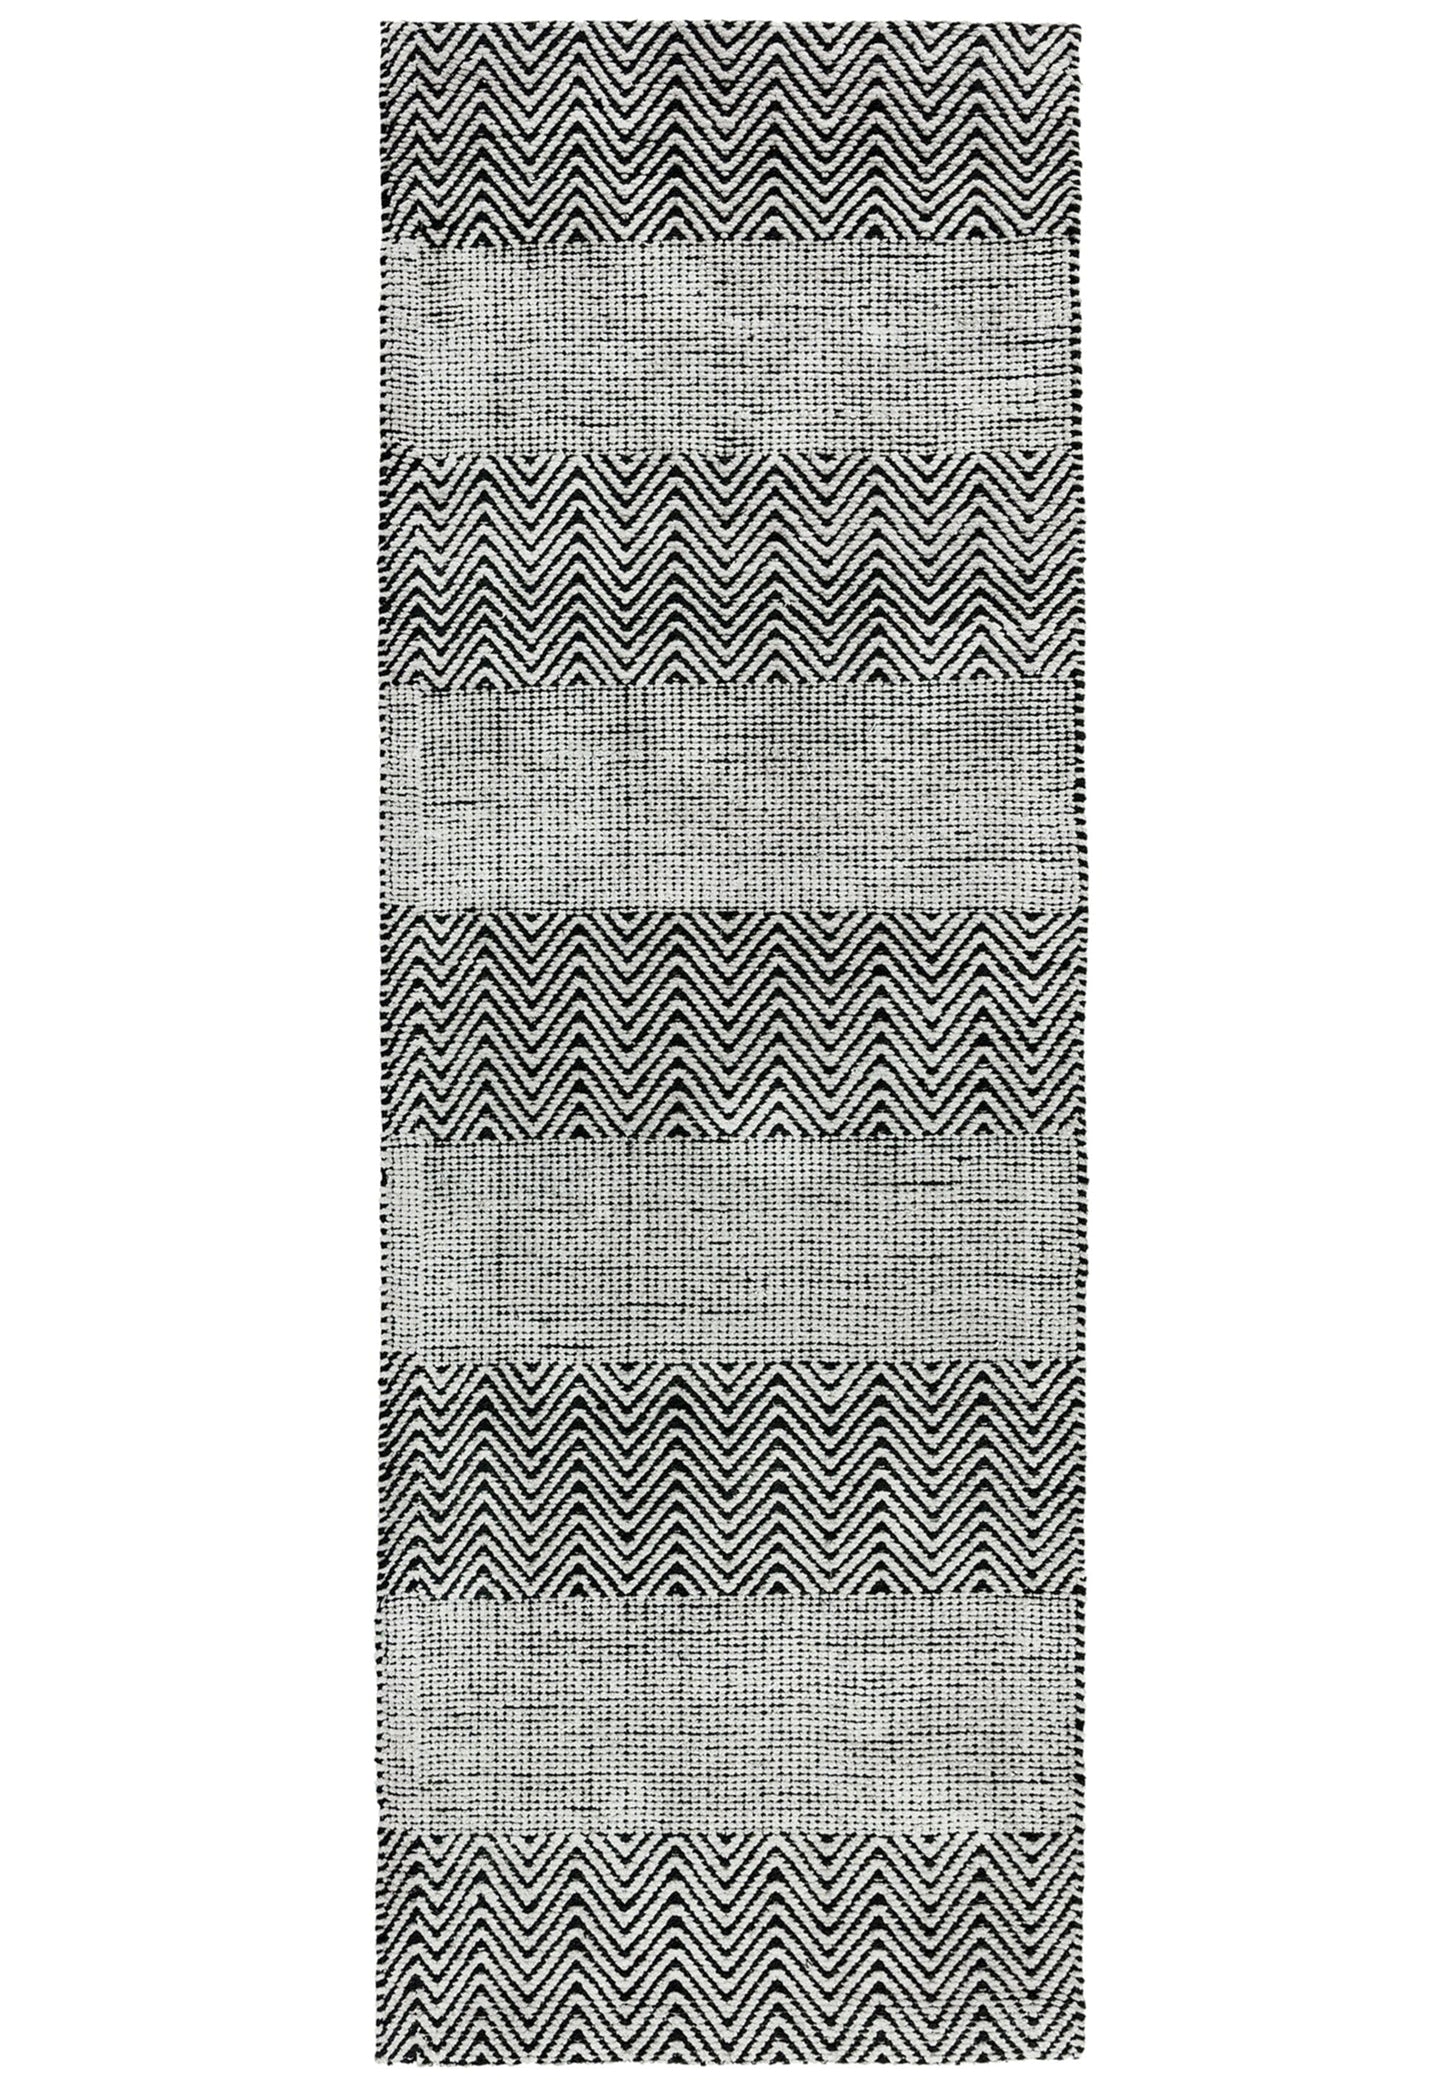 Asiatic Carpets Ives Hand Woven Rug Grey - 100 x 150cm